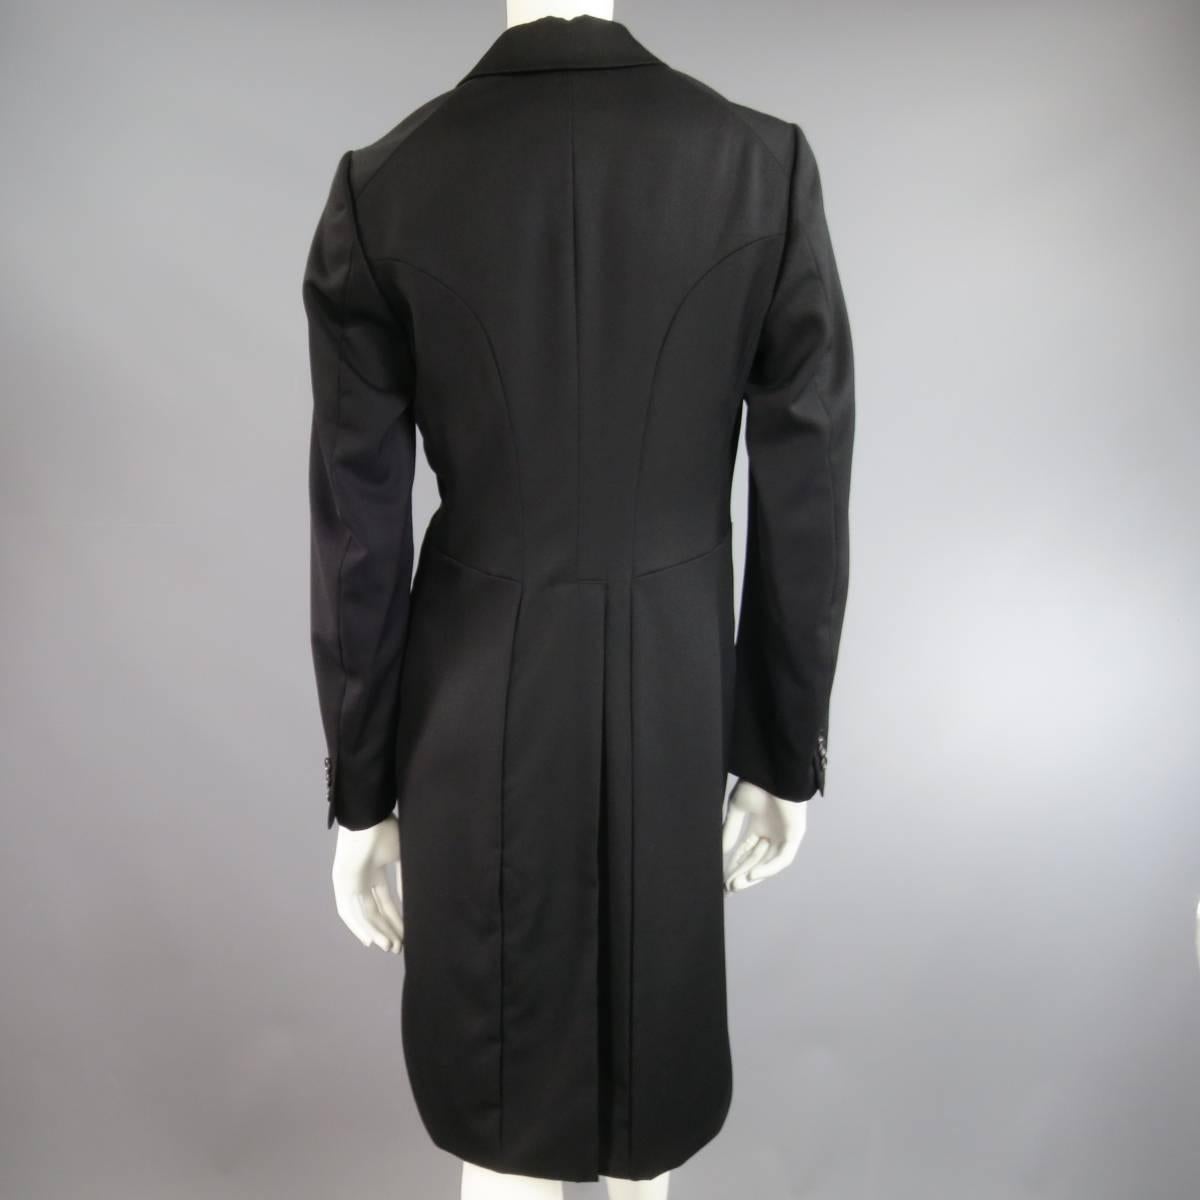 New With Tags COMME des GARCONS Size M Black Wool Peal Lapel Coat Tails Jacket 1